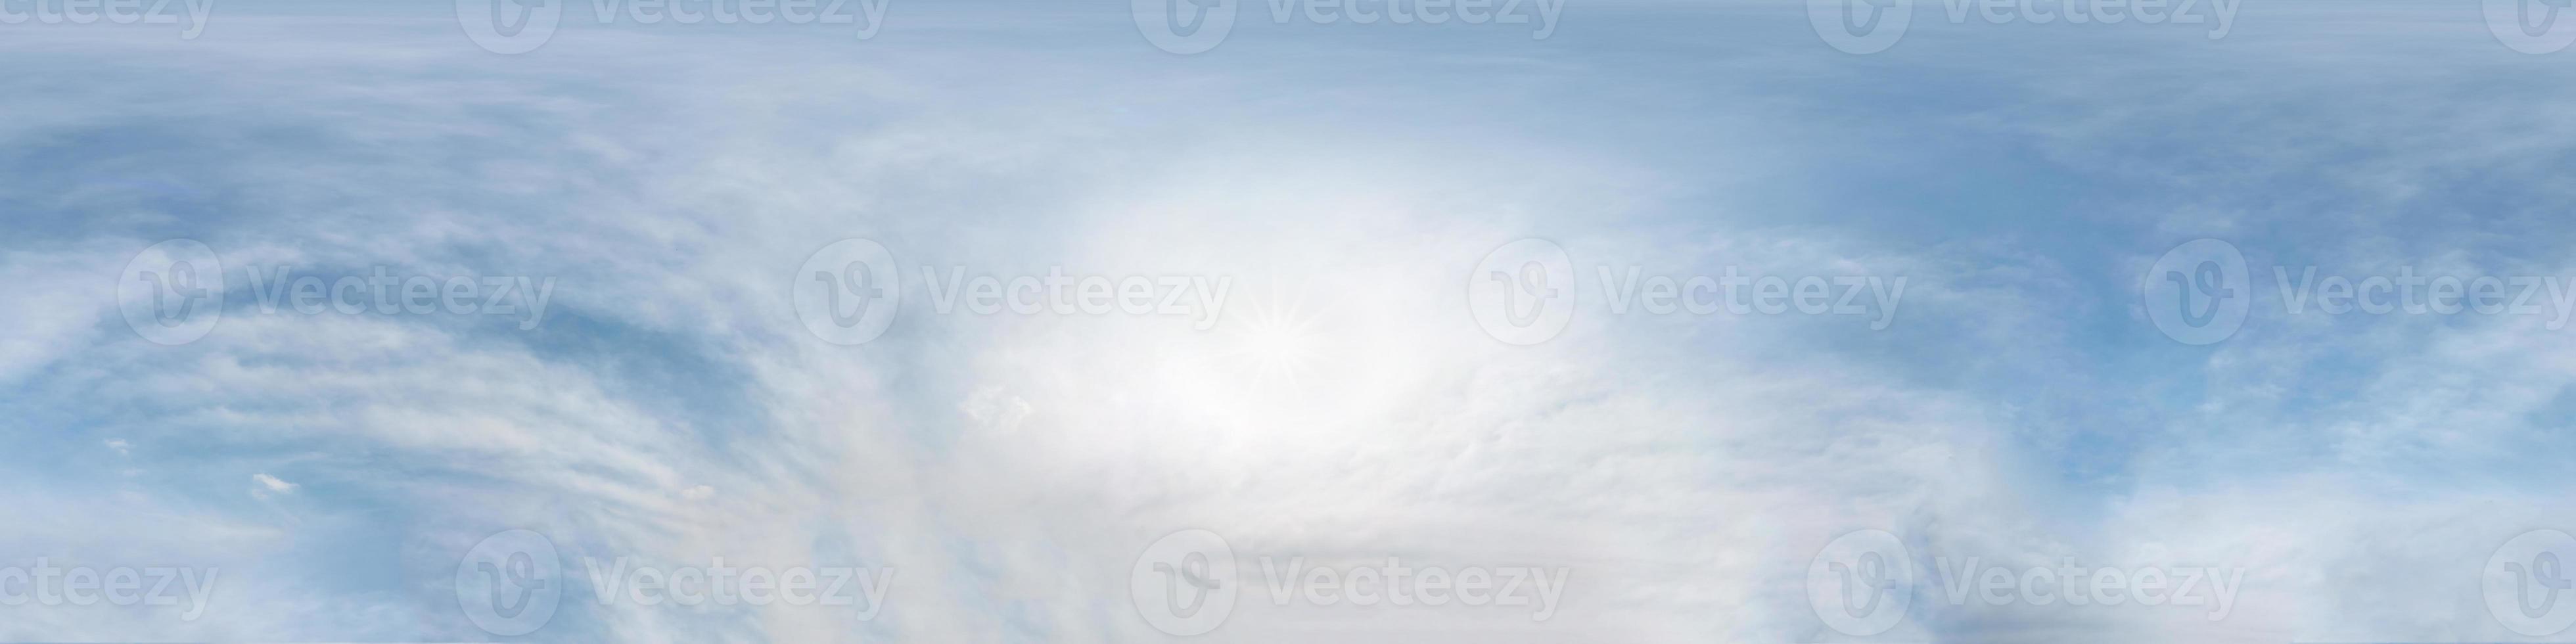 blue sky with morning fog. Seamless hdri panorama 360 degrees angle view  with zenith for use in 3d graphics or game development as sky dome or edit drone shot photo